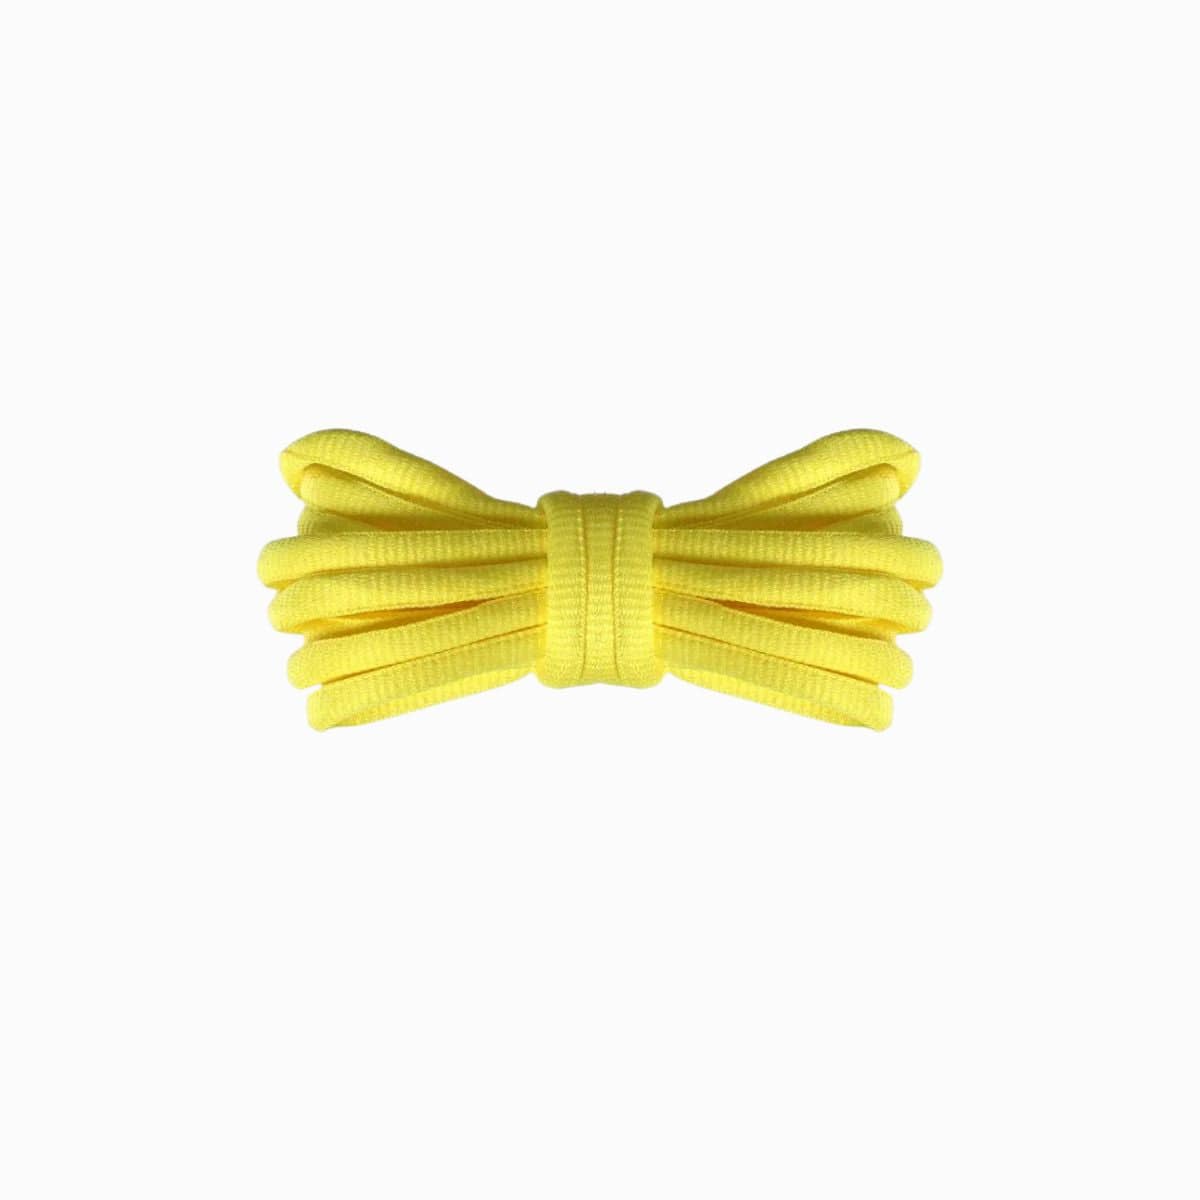 Yellow Replacement Adidas Shoe Laces for Adidas Spezial Sneakers by Kicks Shoelaces